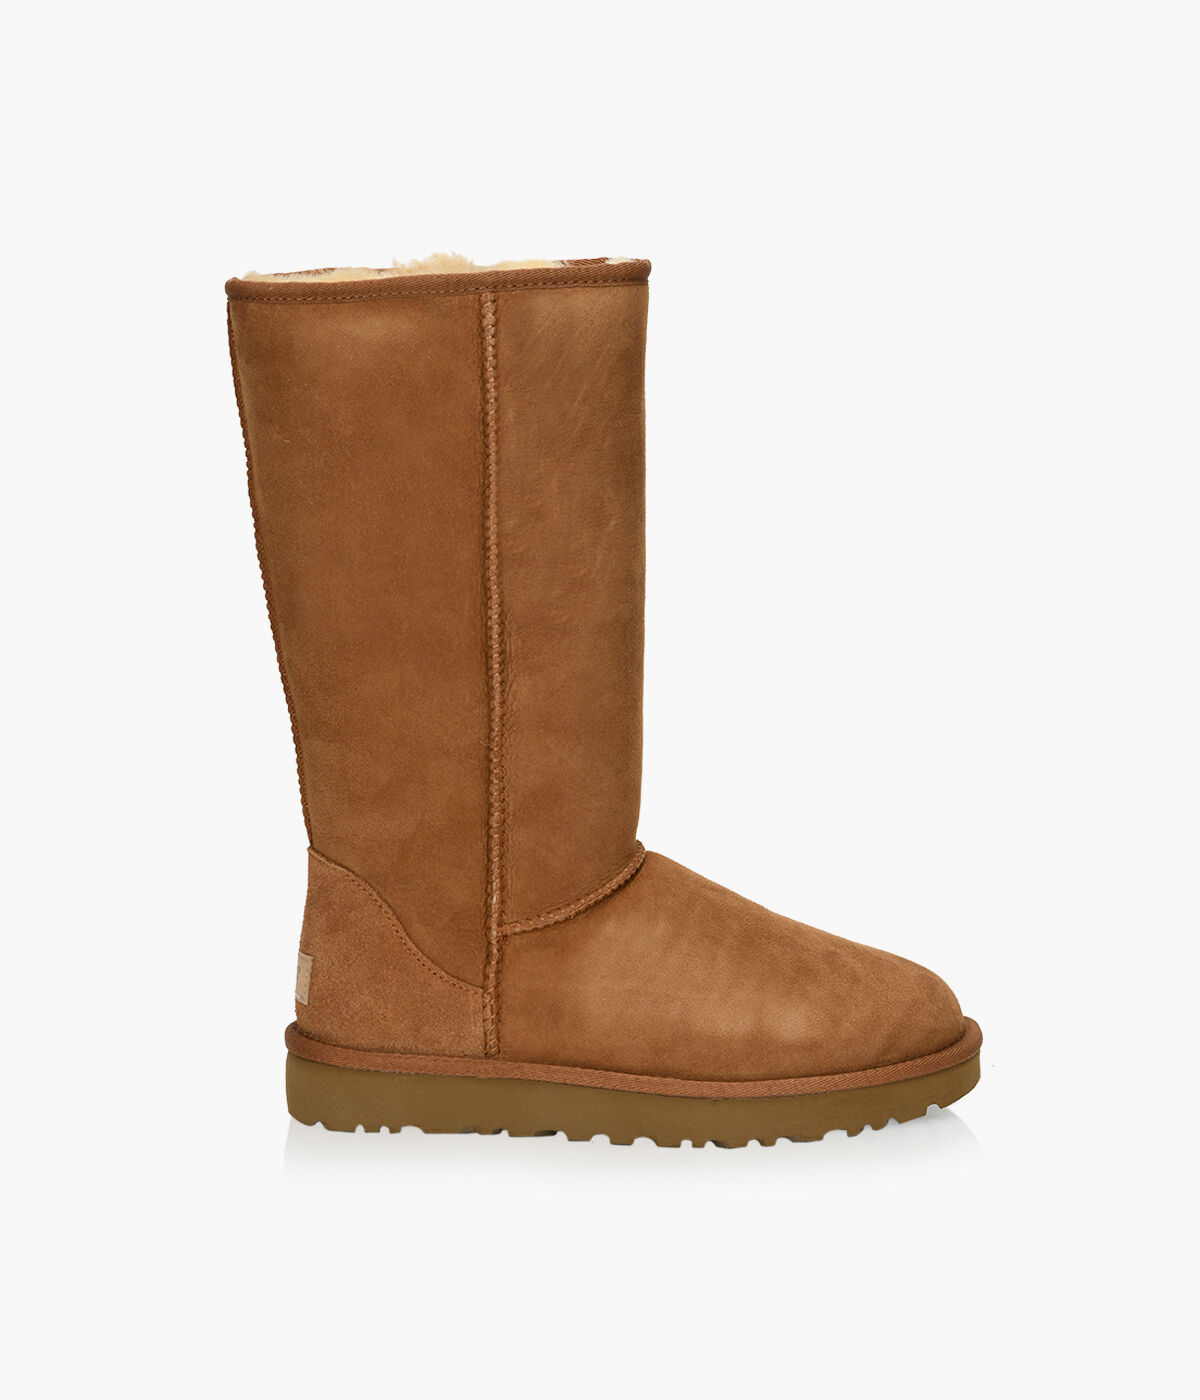 UGG CLASSIC TALL II - Suede | Browns Shoes